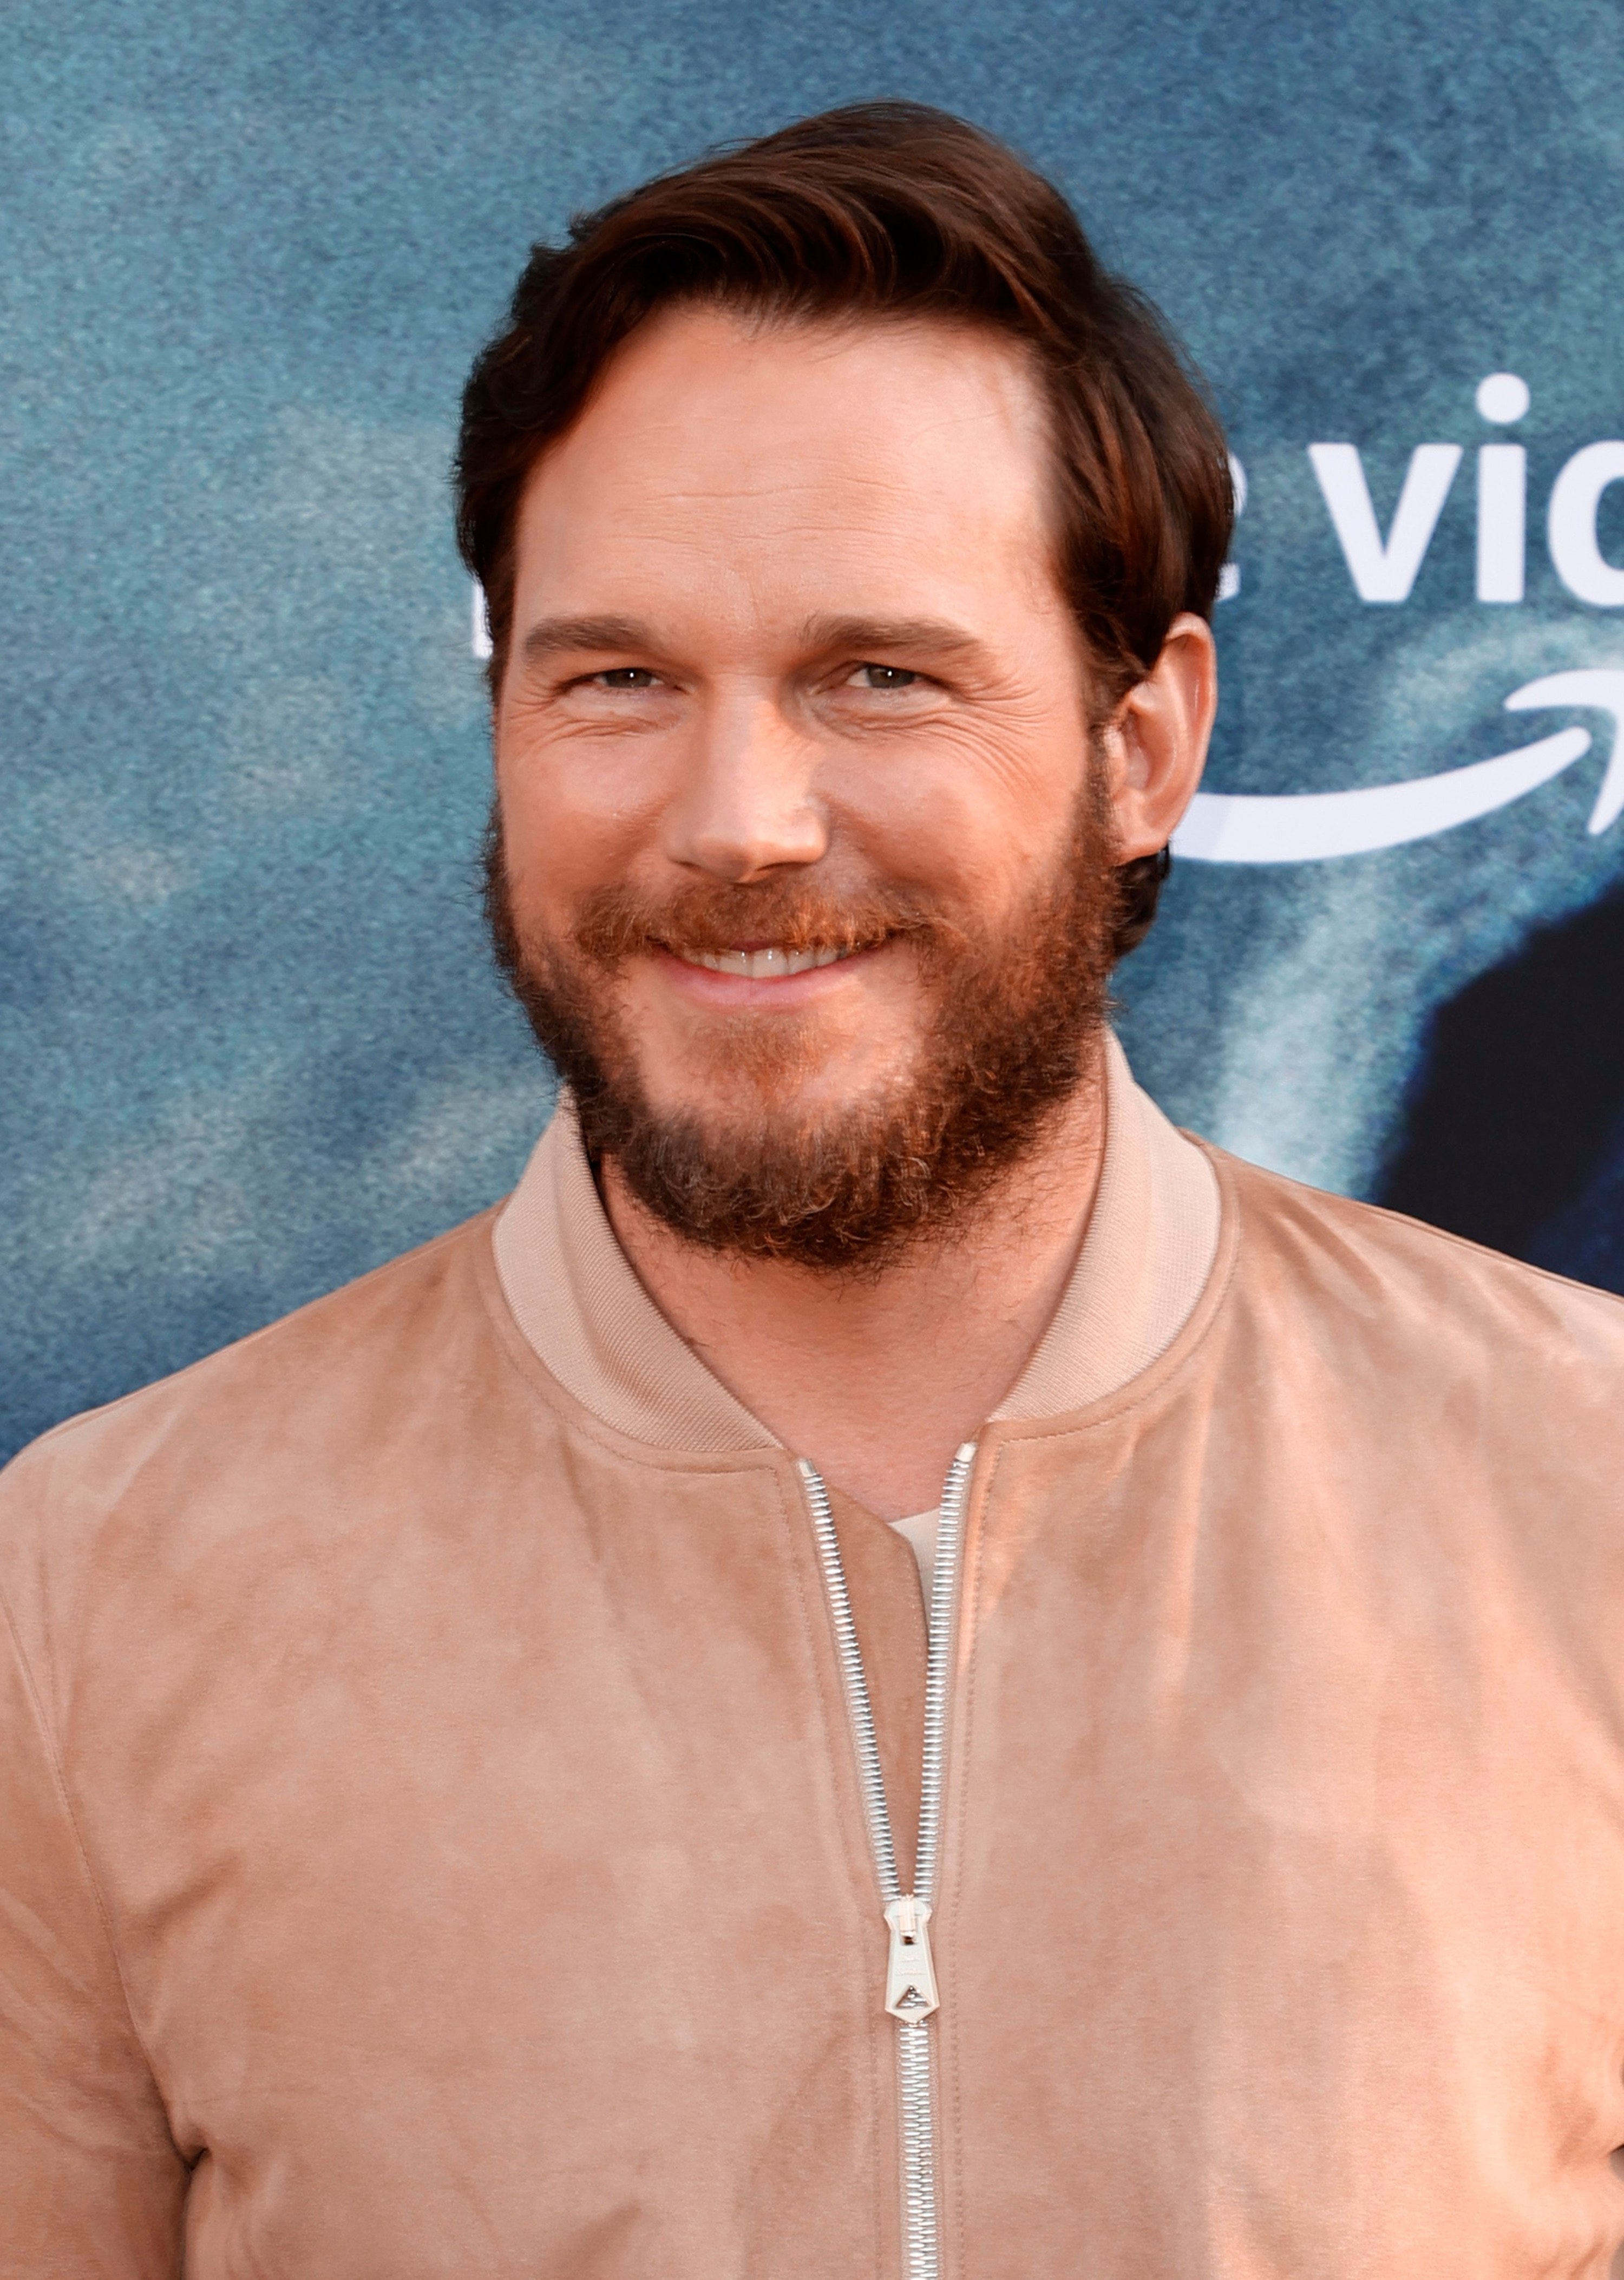 Chris Pratt at a premiere in a zip-up jacket smiling in 2021